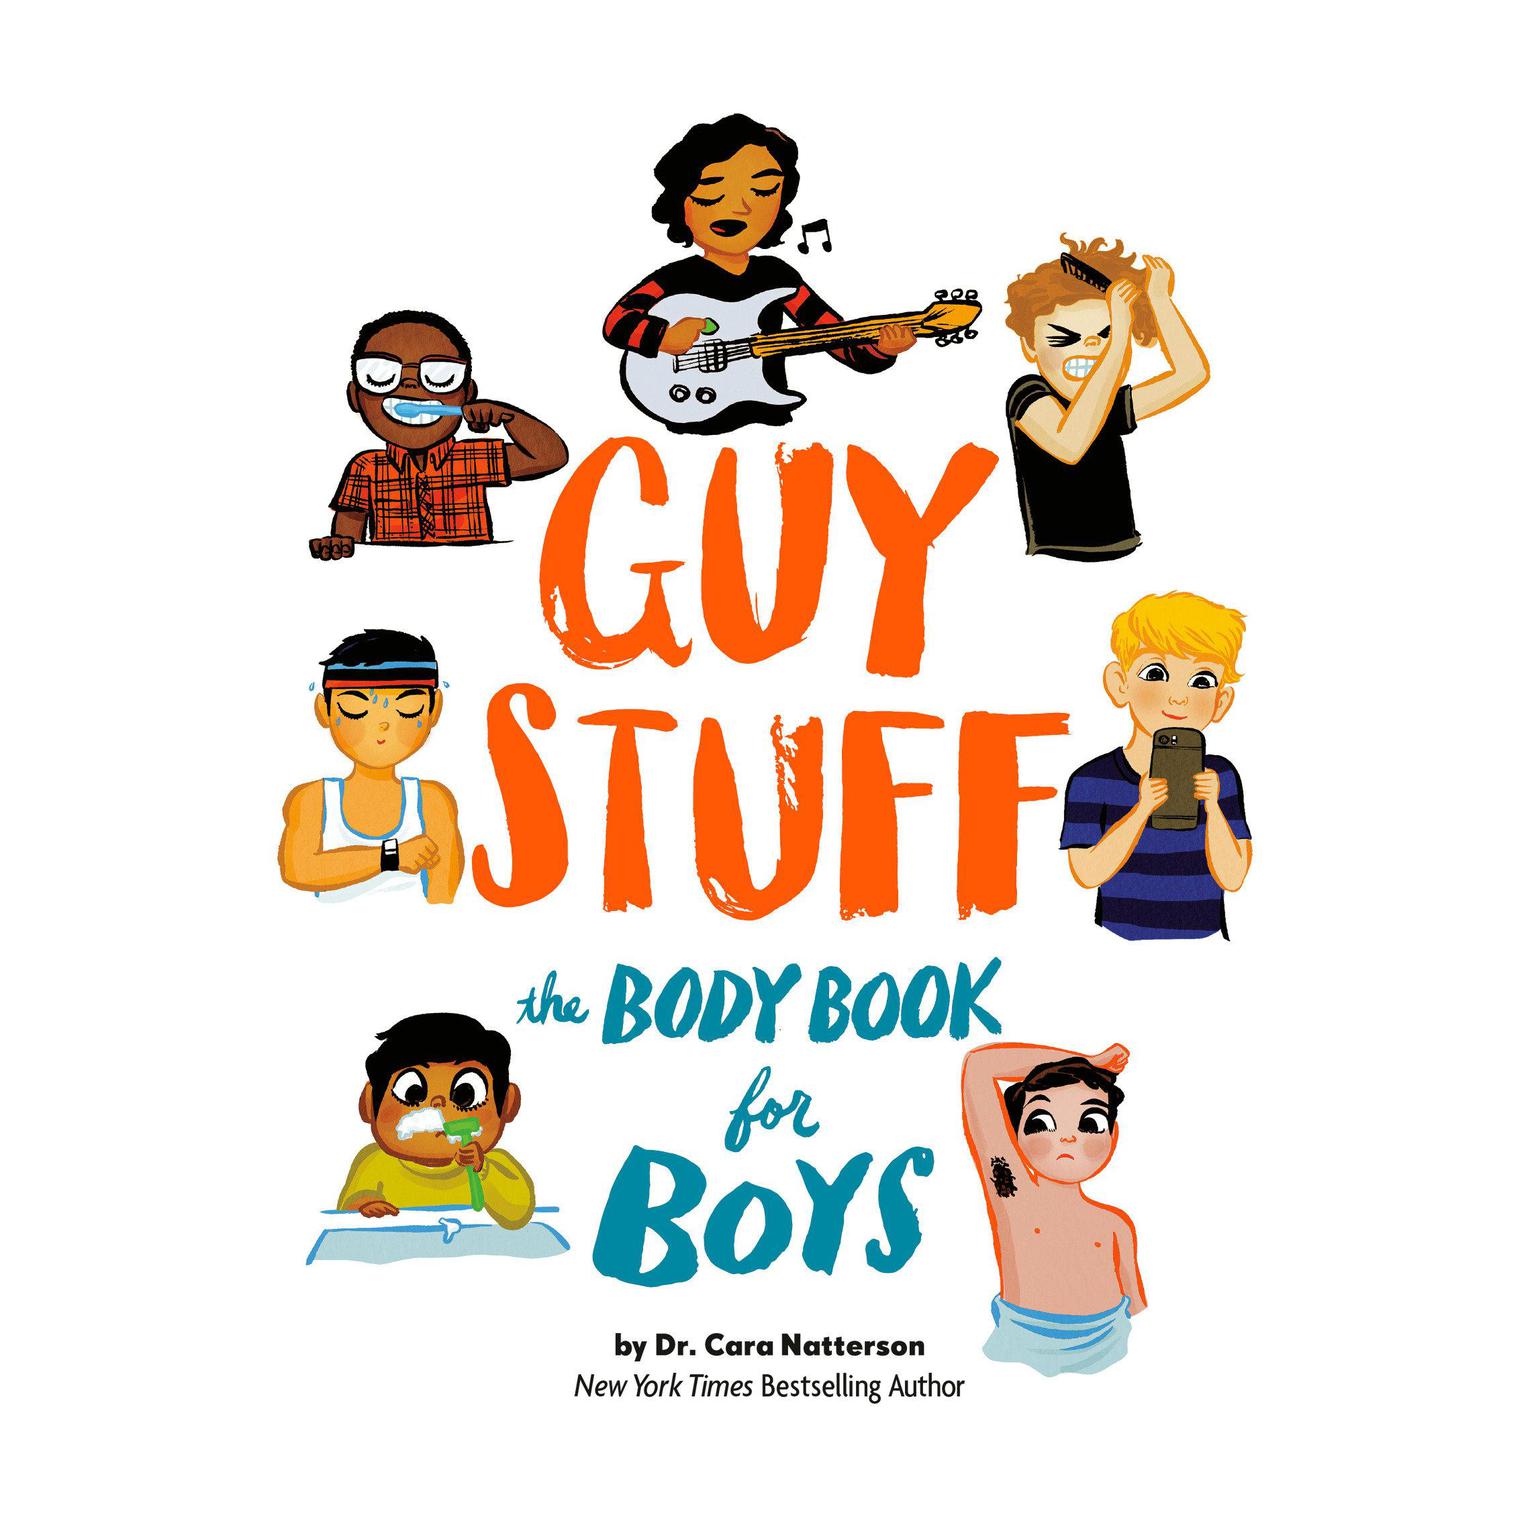 Guy Stuff: The Body Book for Boys: The Body Book for Boys Audiobook, by Cara Natterson